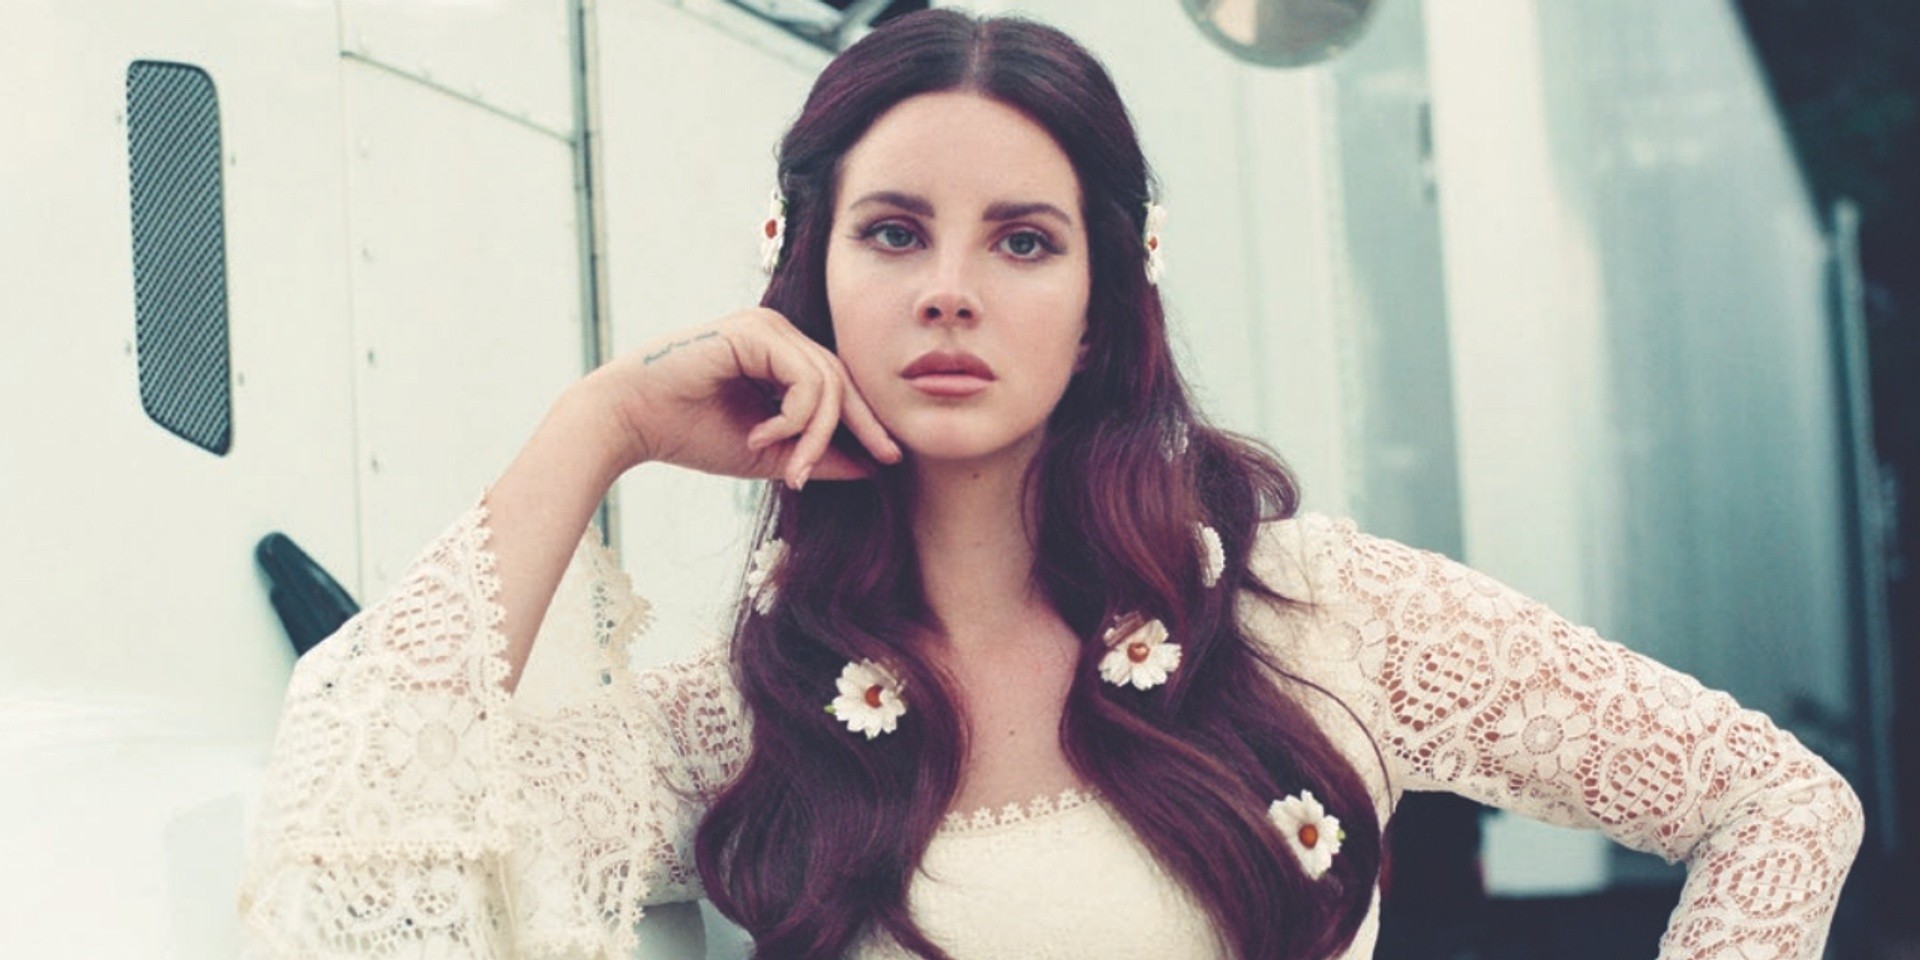 Lana Del Rey teases title track from upcoming studio album